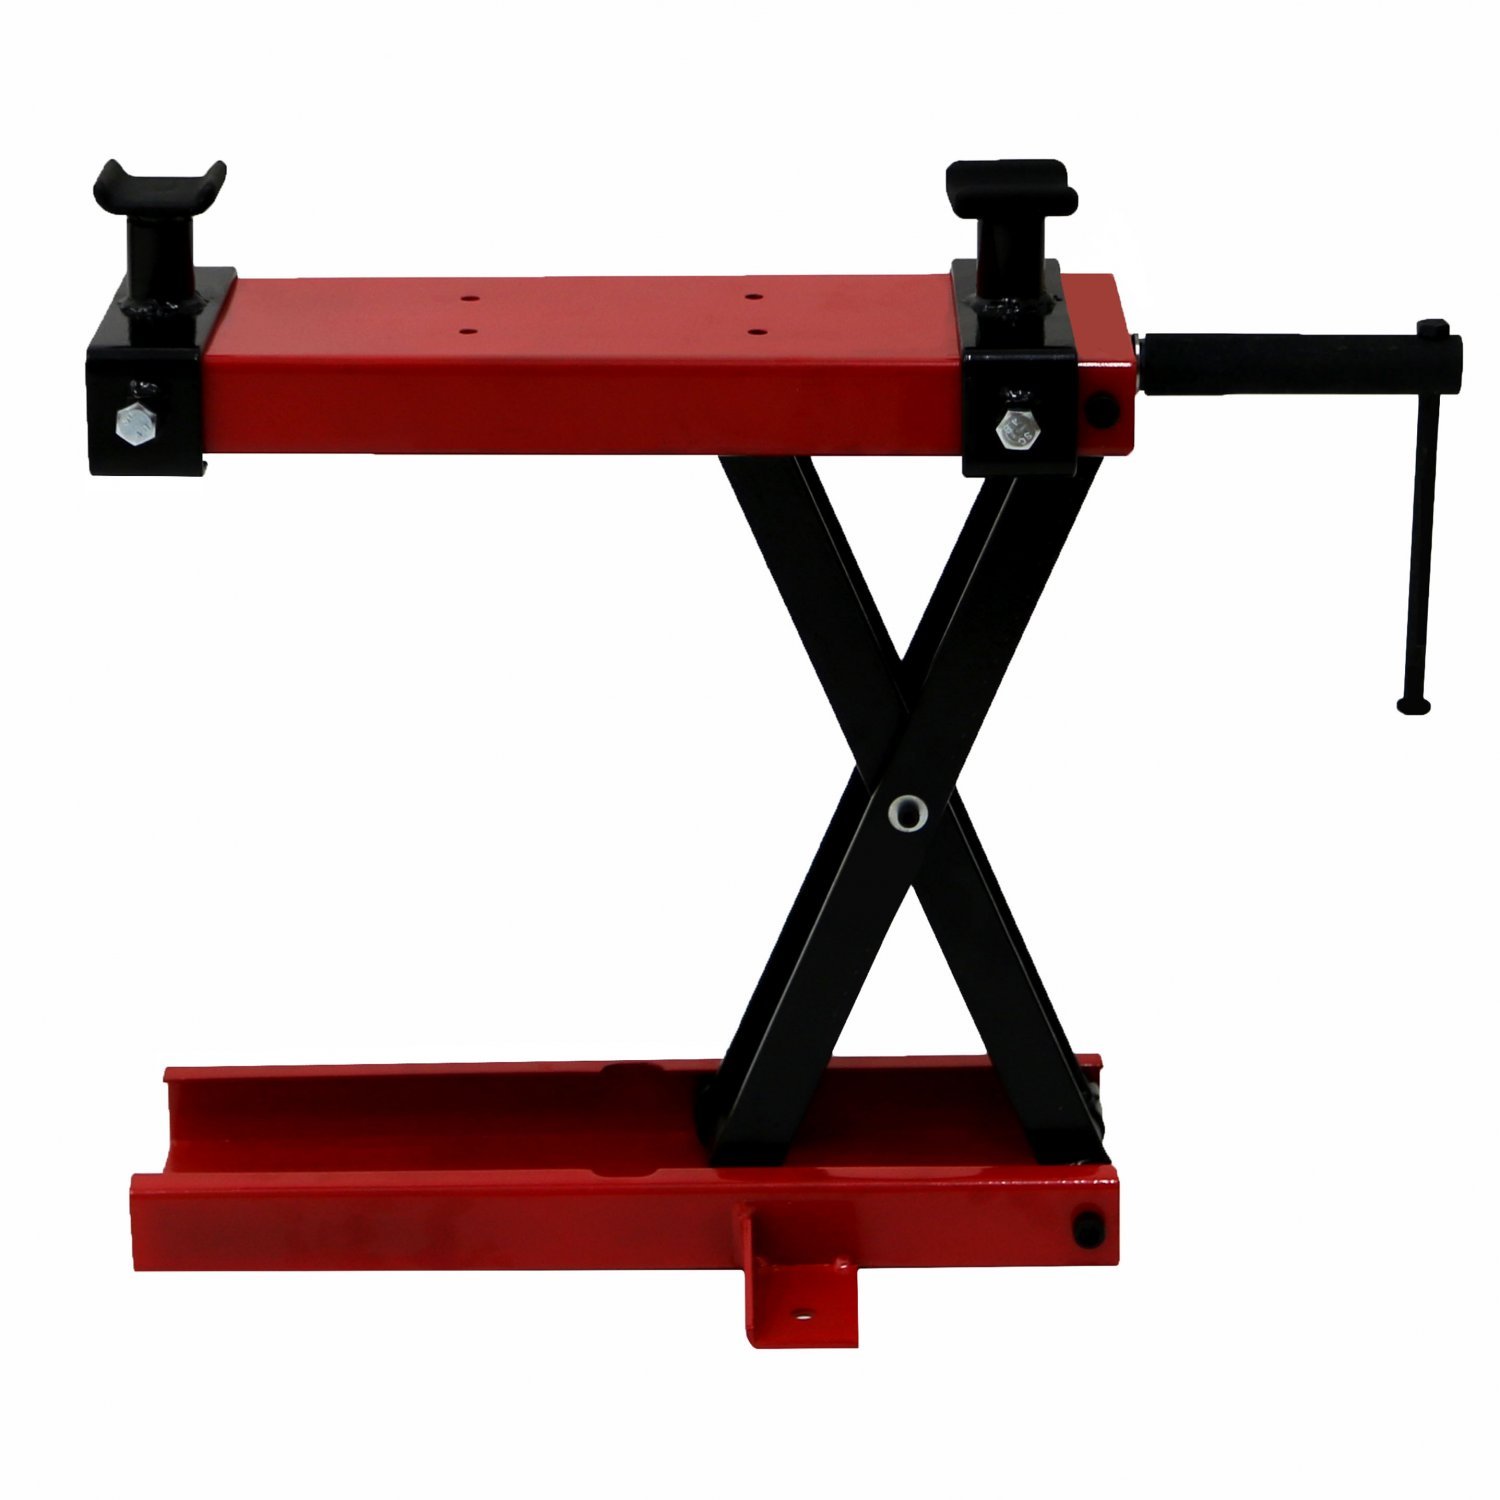 N\C Perfect 500KG Motorcycle Table Bench Workshop Scissor Lift Jack Stand Paddock 